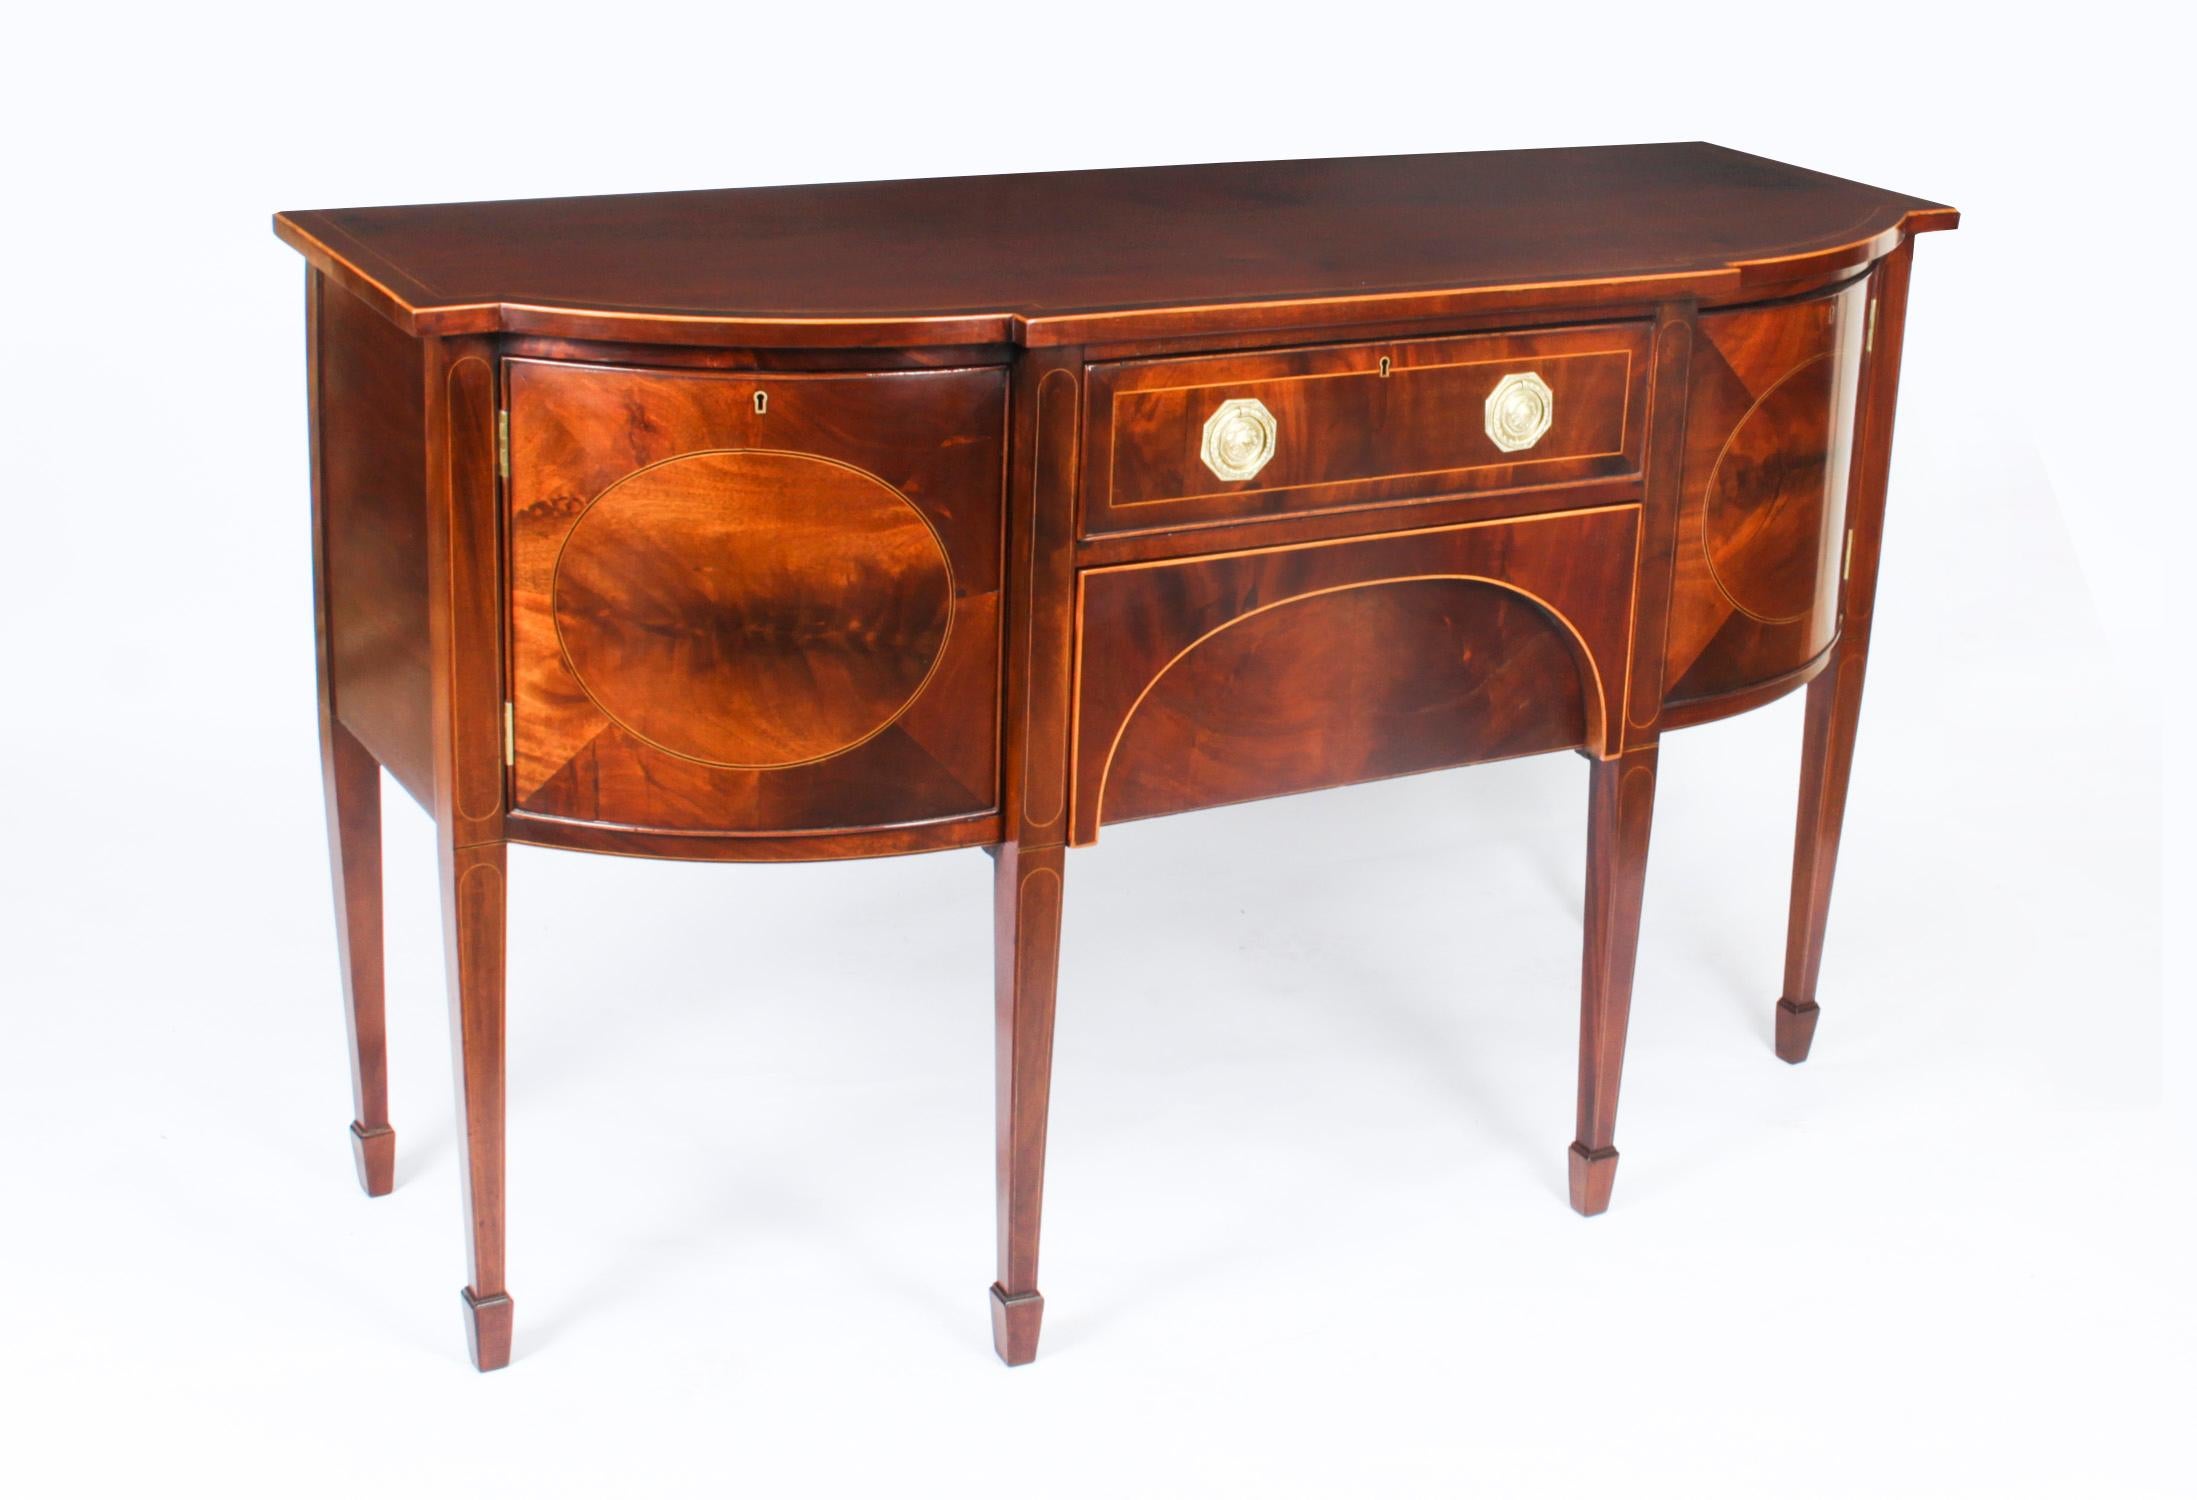 This is a superb antique George III inlaid flame mahogany bowfront sideboard, circa 1780 in date.

The top is banded in flame mahogany with boxwood inlay and has a central frieze drawer above a deep drawer. There is a shaped door on each end and